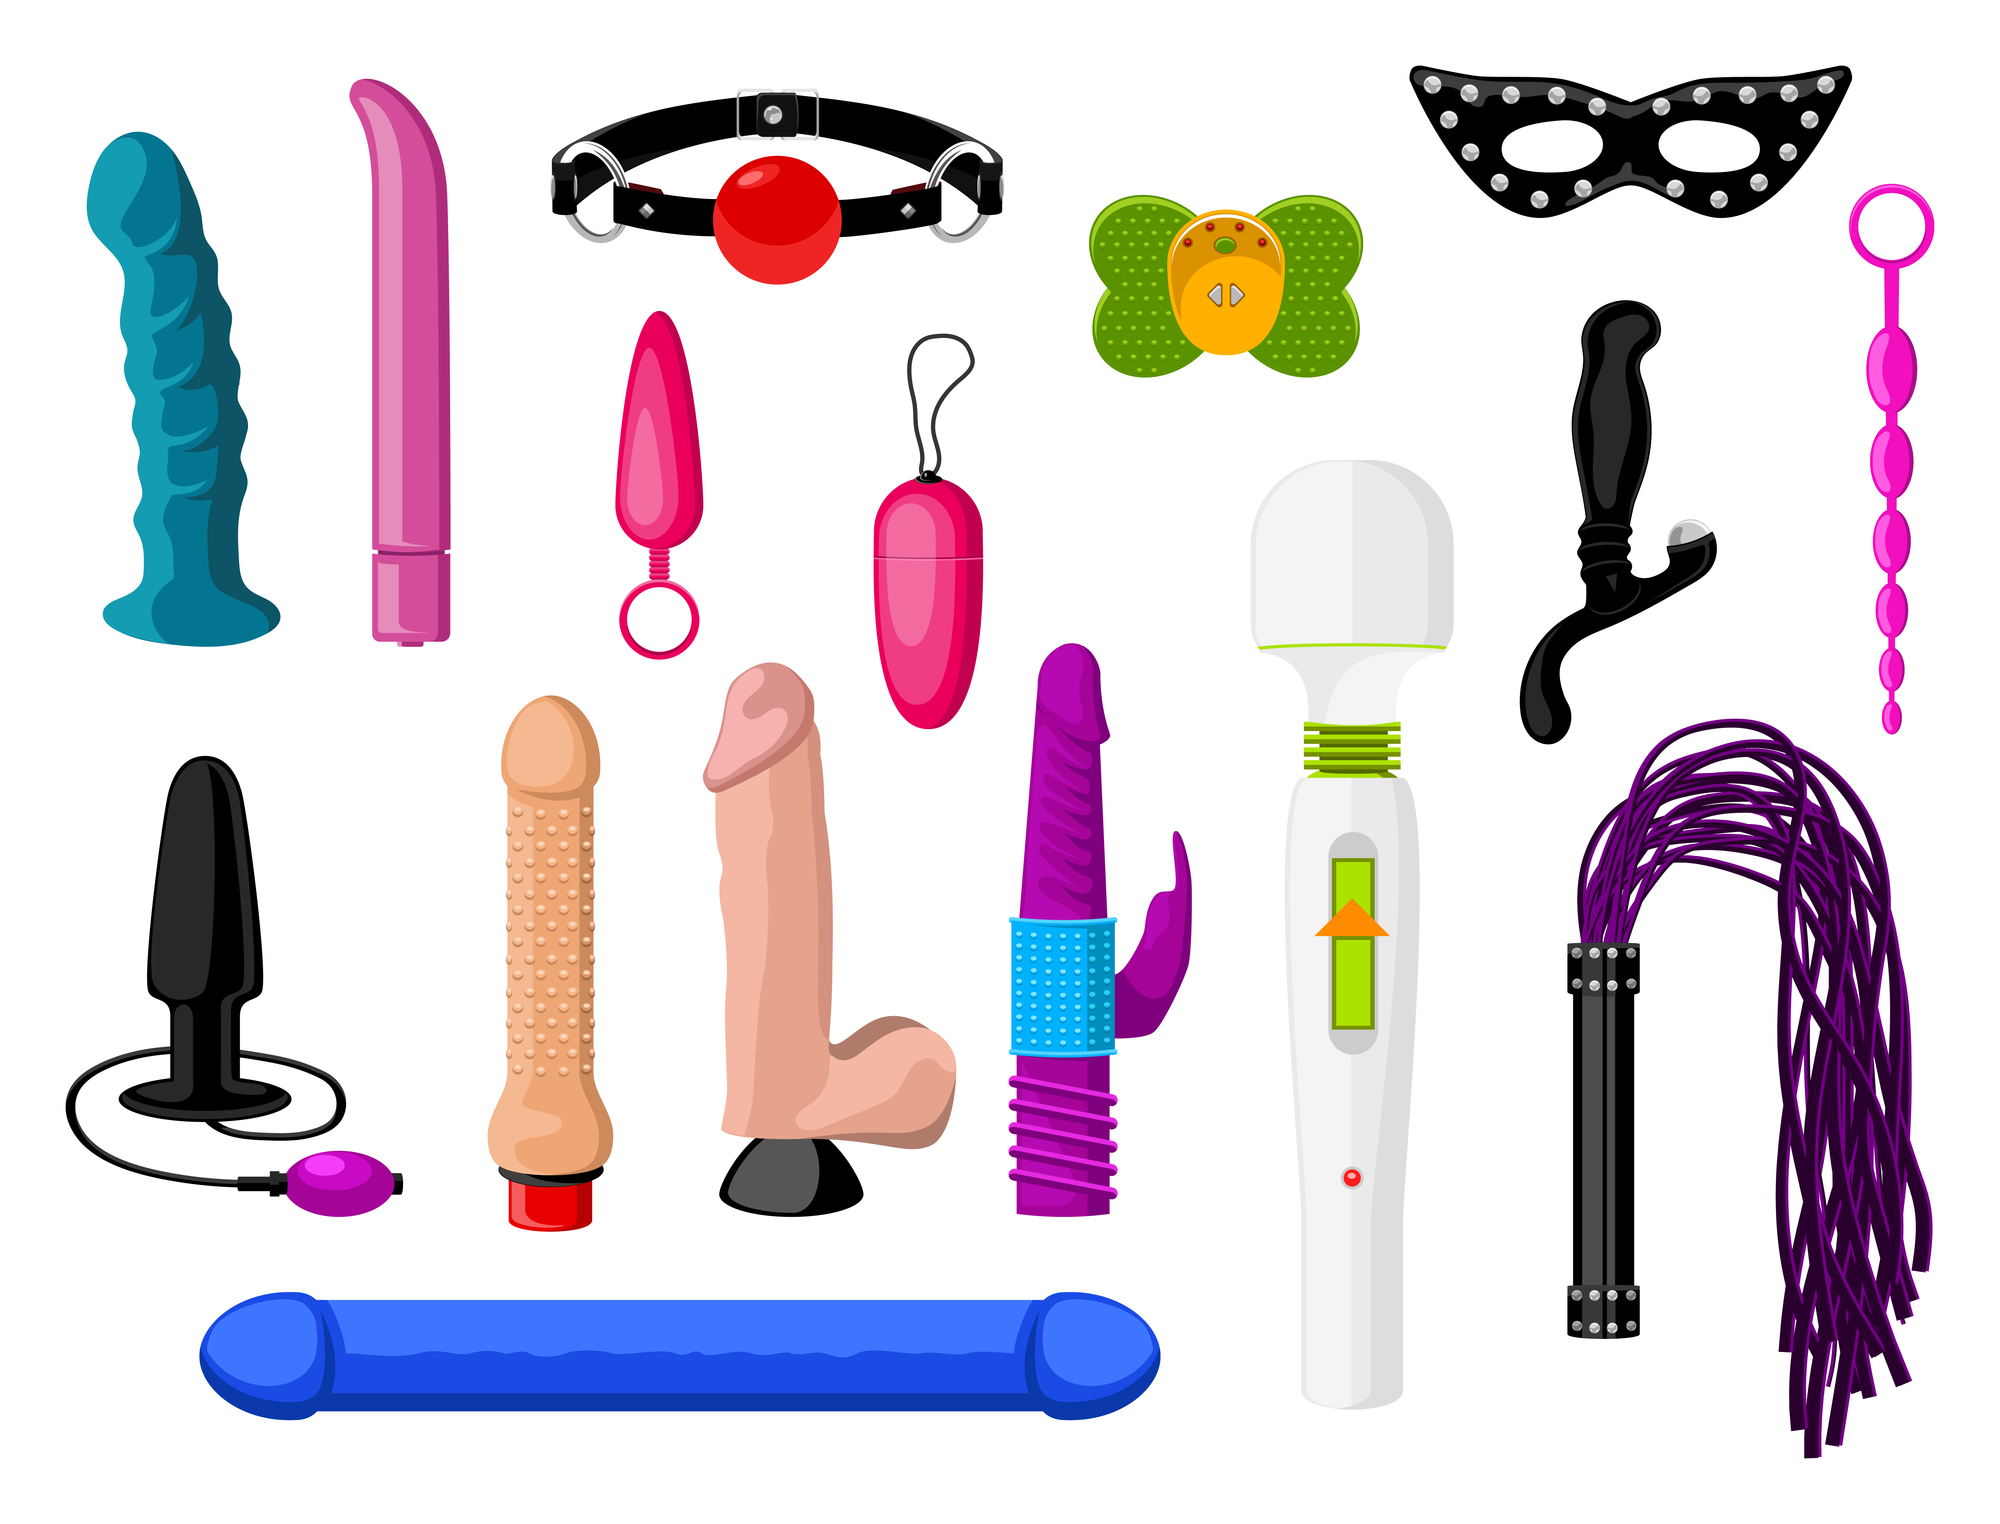 Do you use sex toys and vibrators?